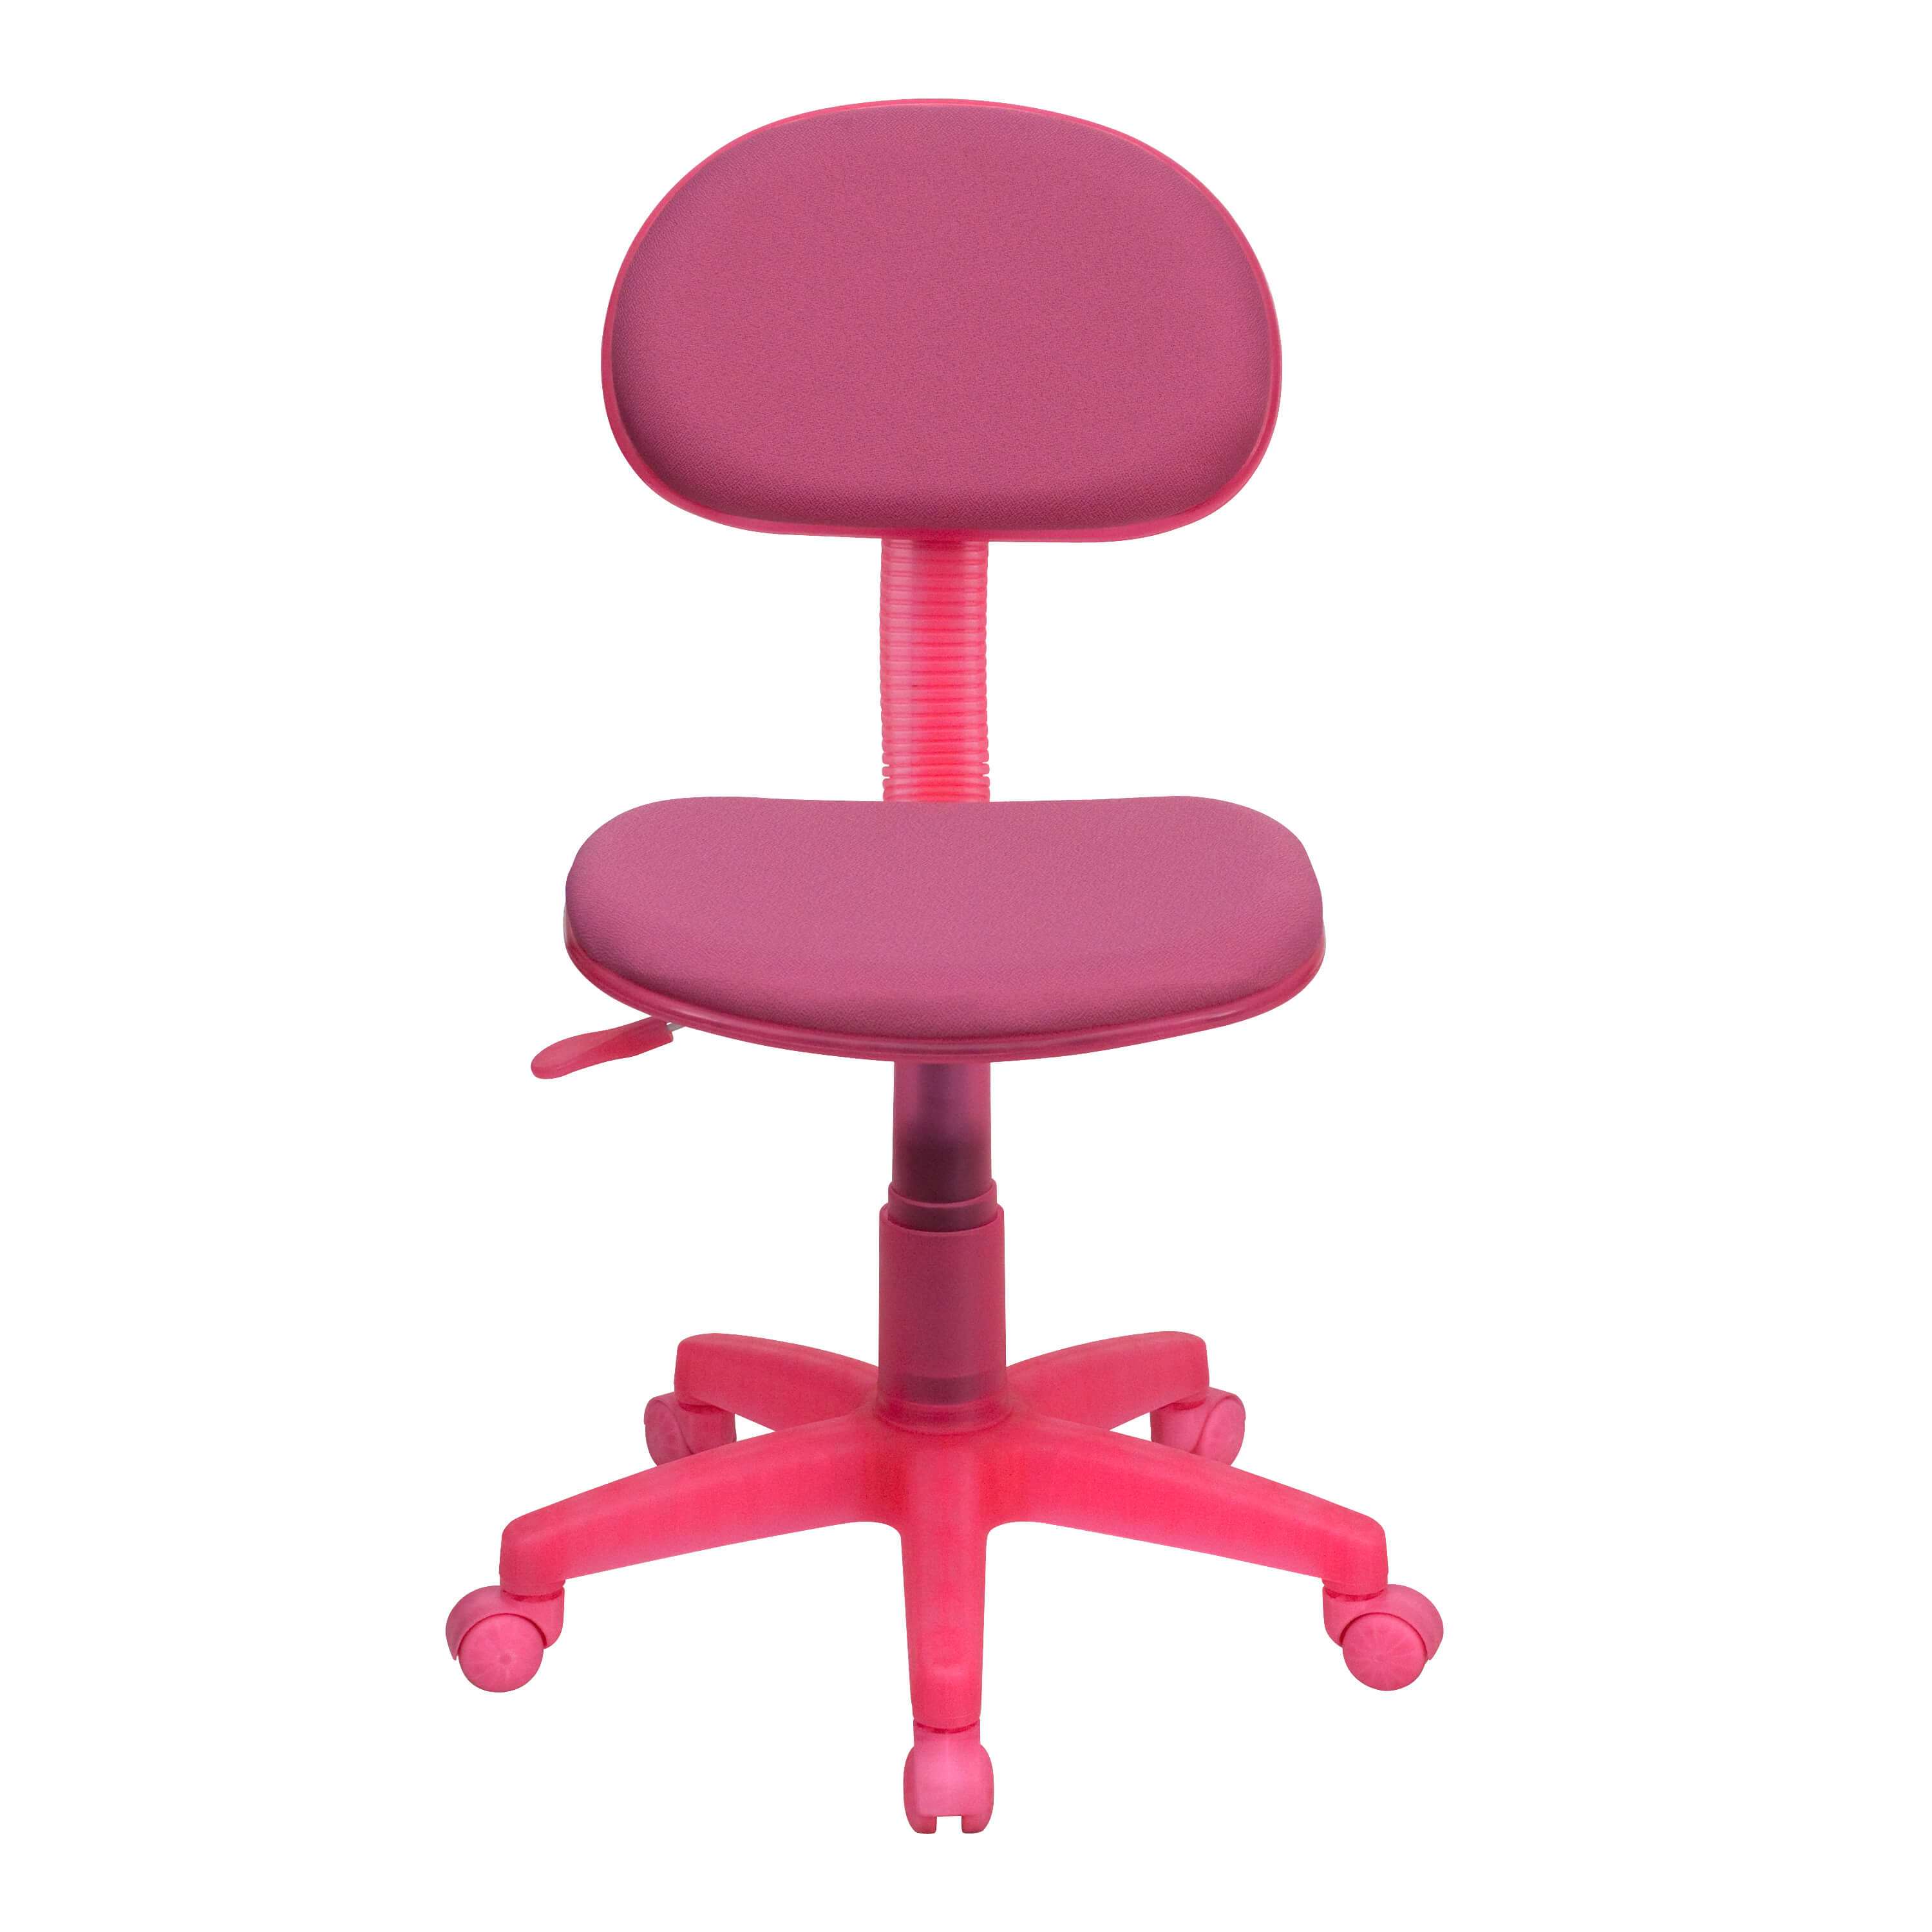 Colorful desk chairs CUB BT 698 PINK GG FLA